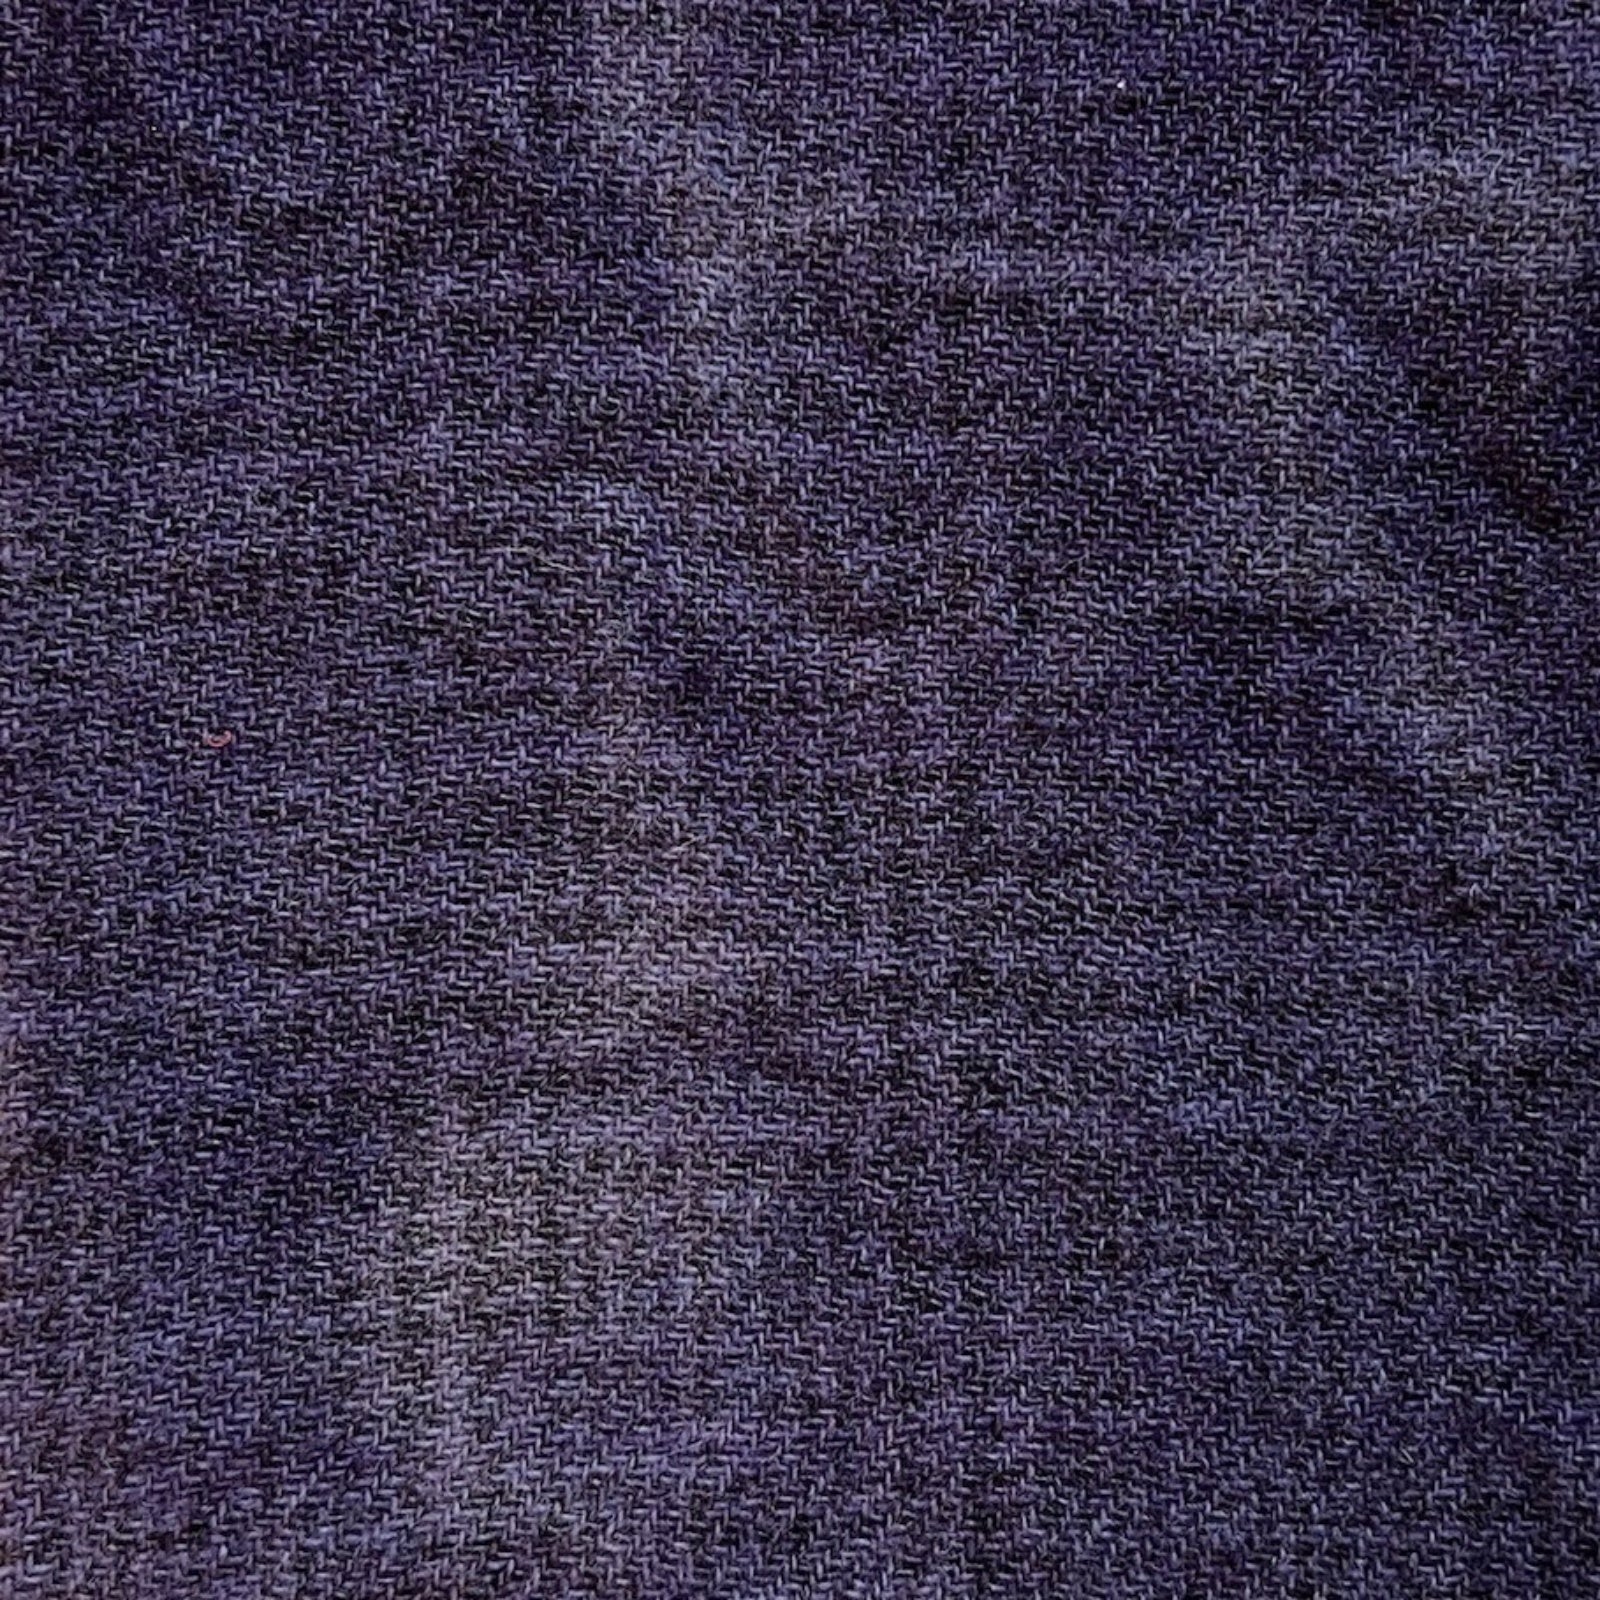 Starless Night - Colorama Hand Dyed Wool - Offered by HoneyBee Hive Rug Hooking